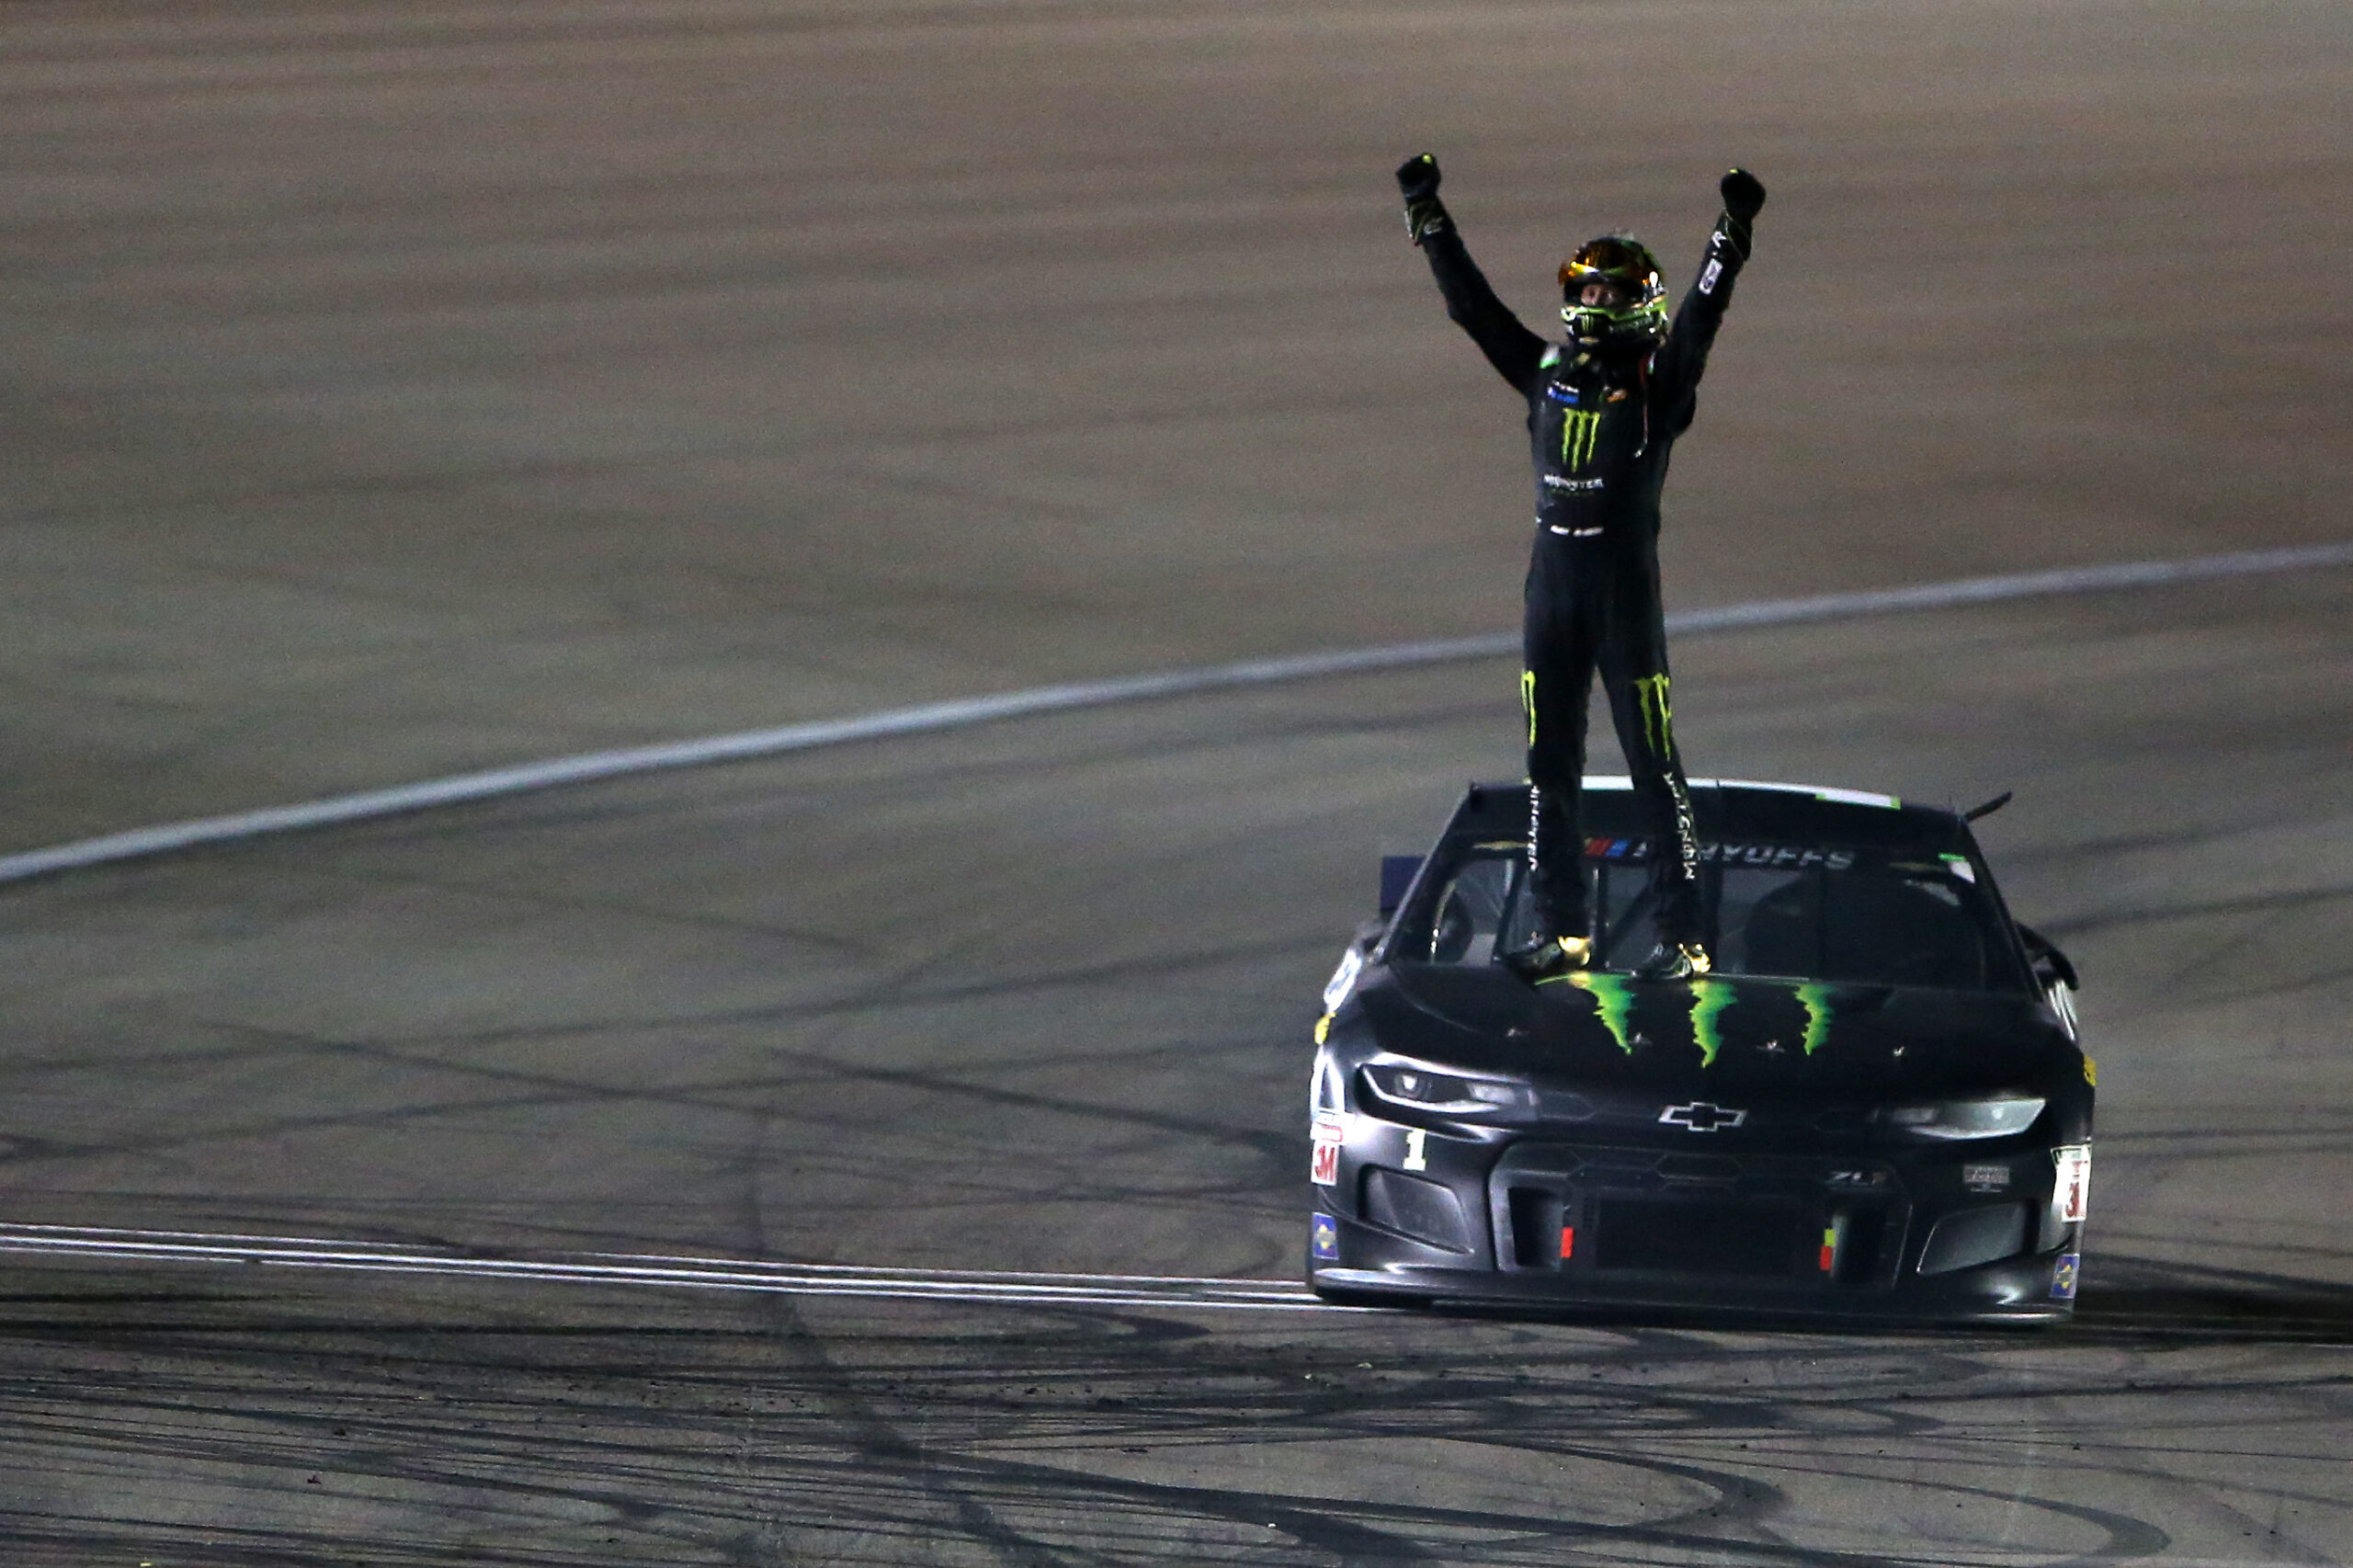 Arms raised in Victory at Las Vegas. (Photo Credit: Brian Lawdermilk/Getty Images)